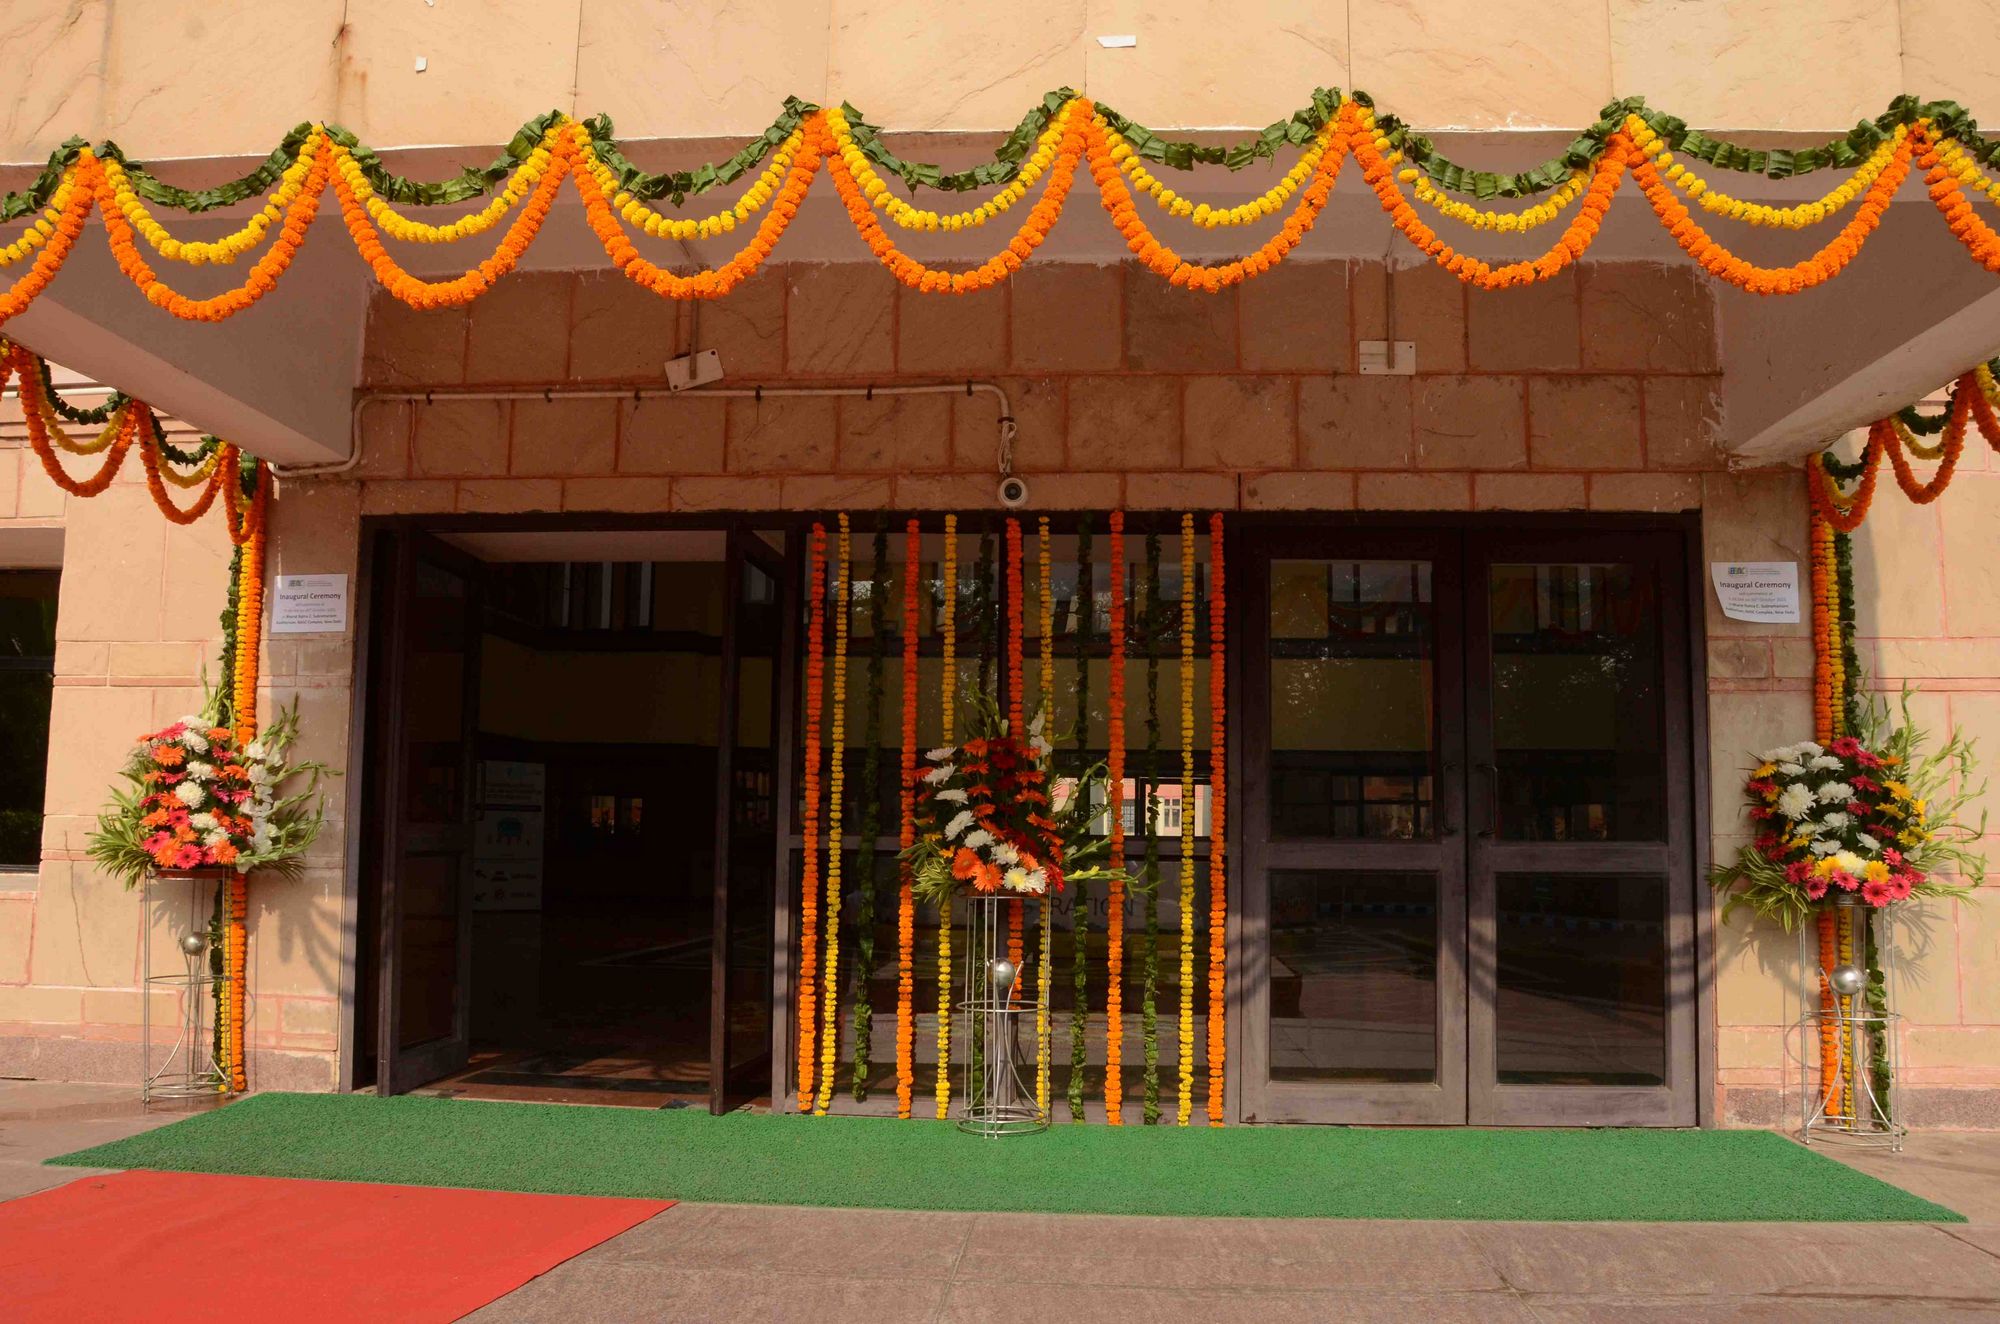 The entrance was decorated with beautiful flower arrangements.